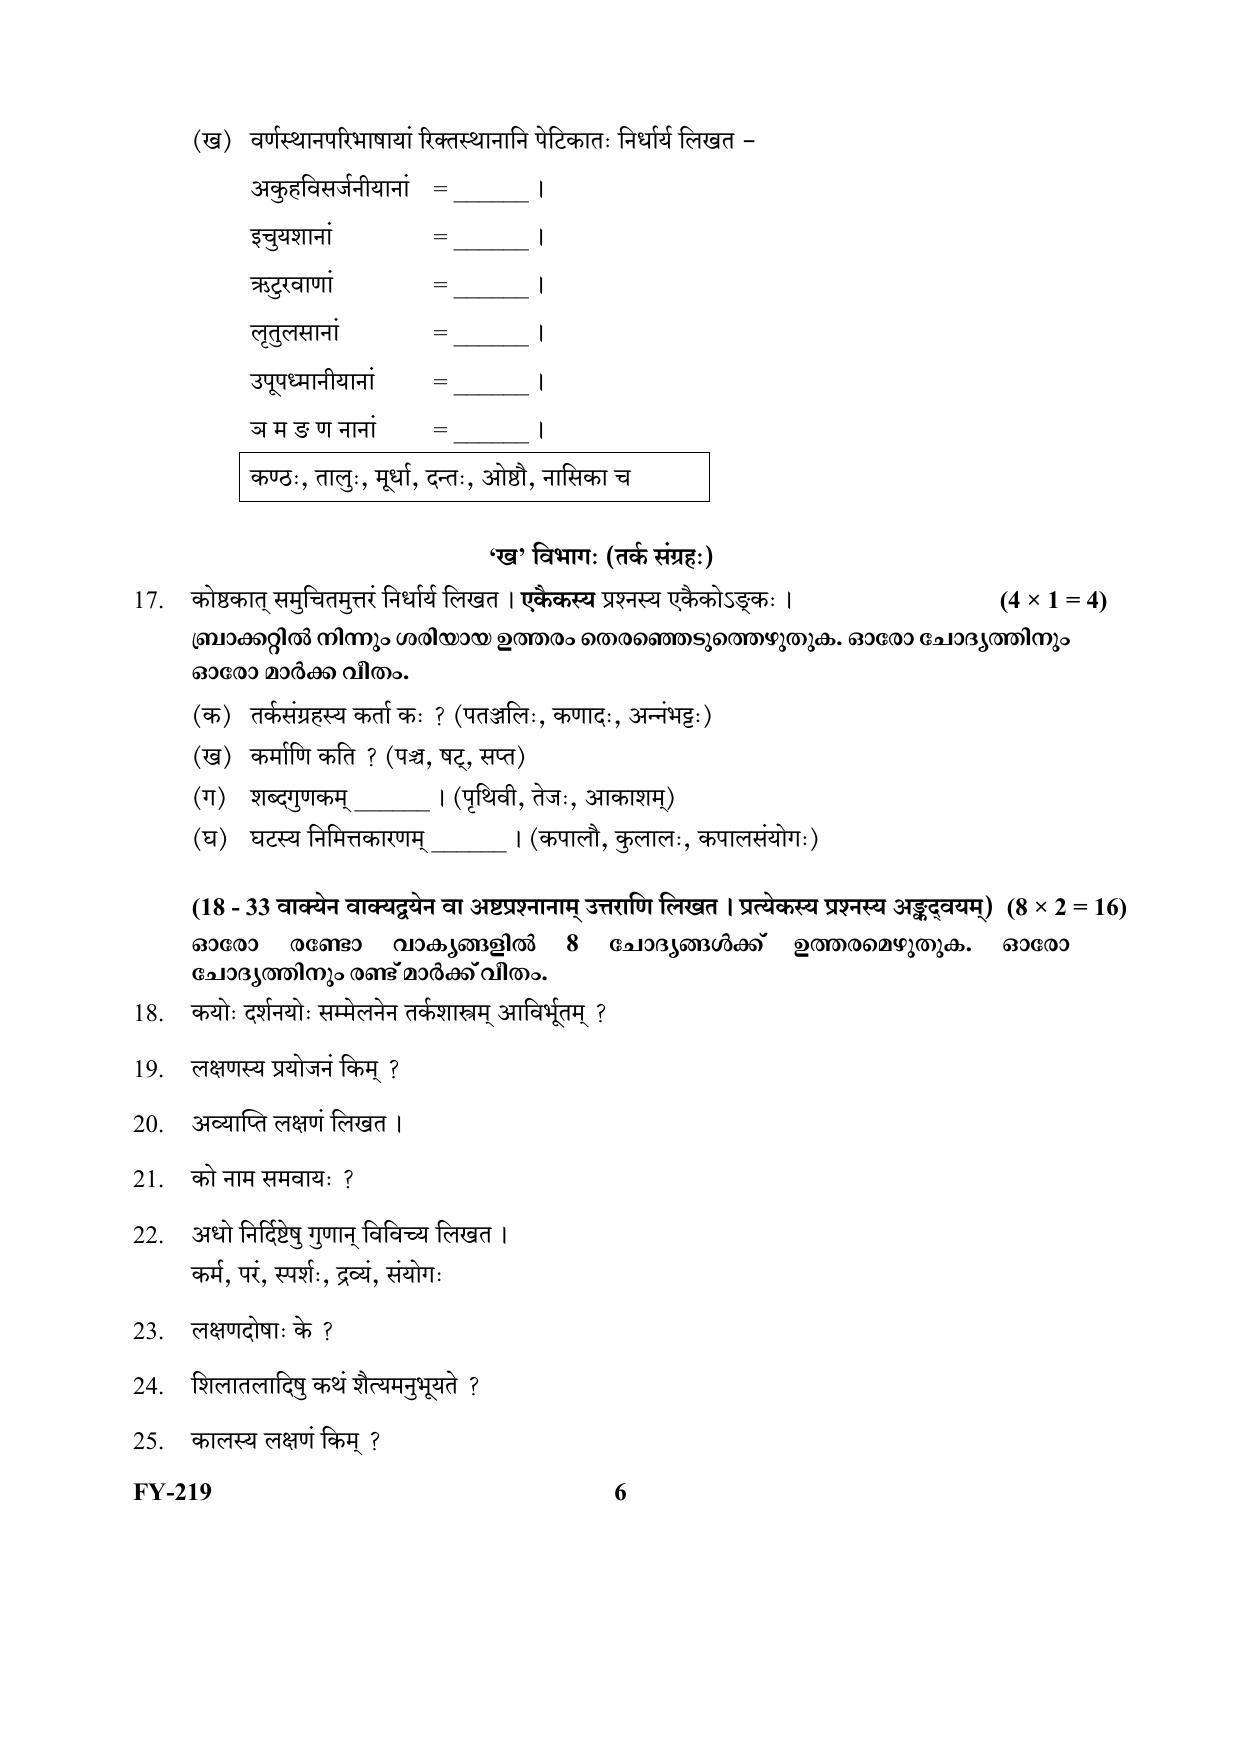 Kerala Plus One (Class 11th) Part-III Sanskrit Sasthra-Optional Question Paper 2021 - Page 6